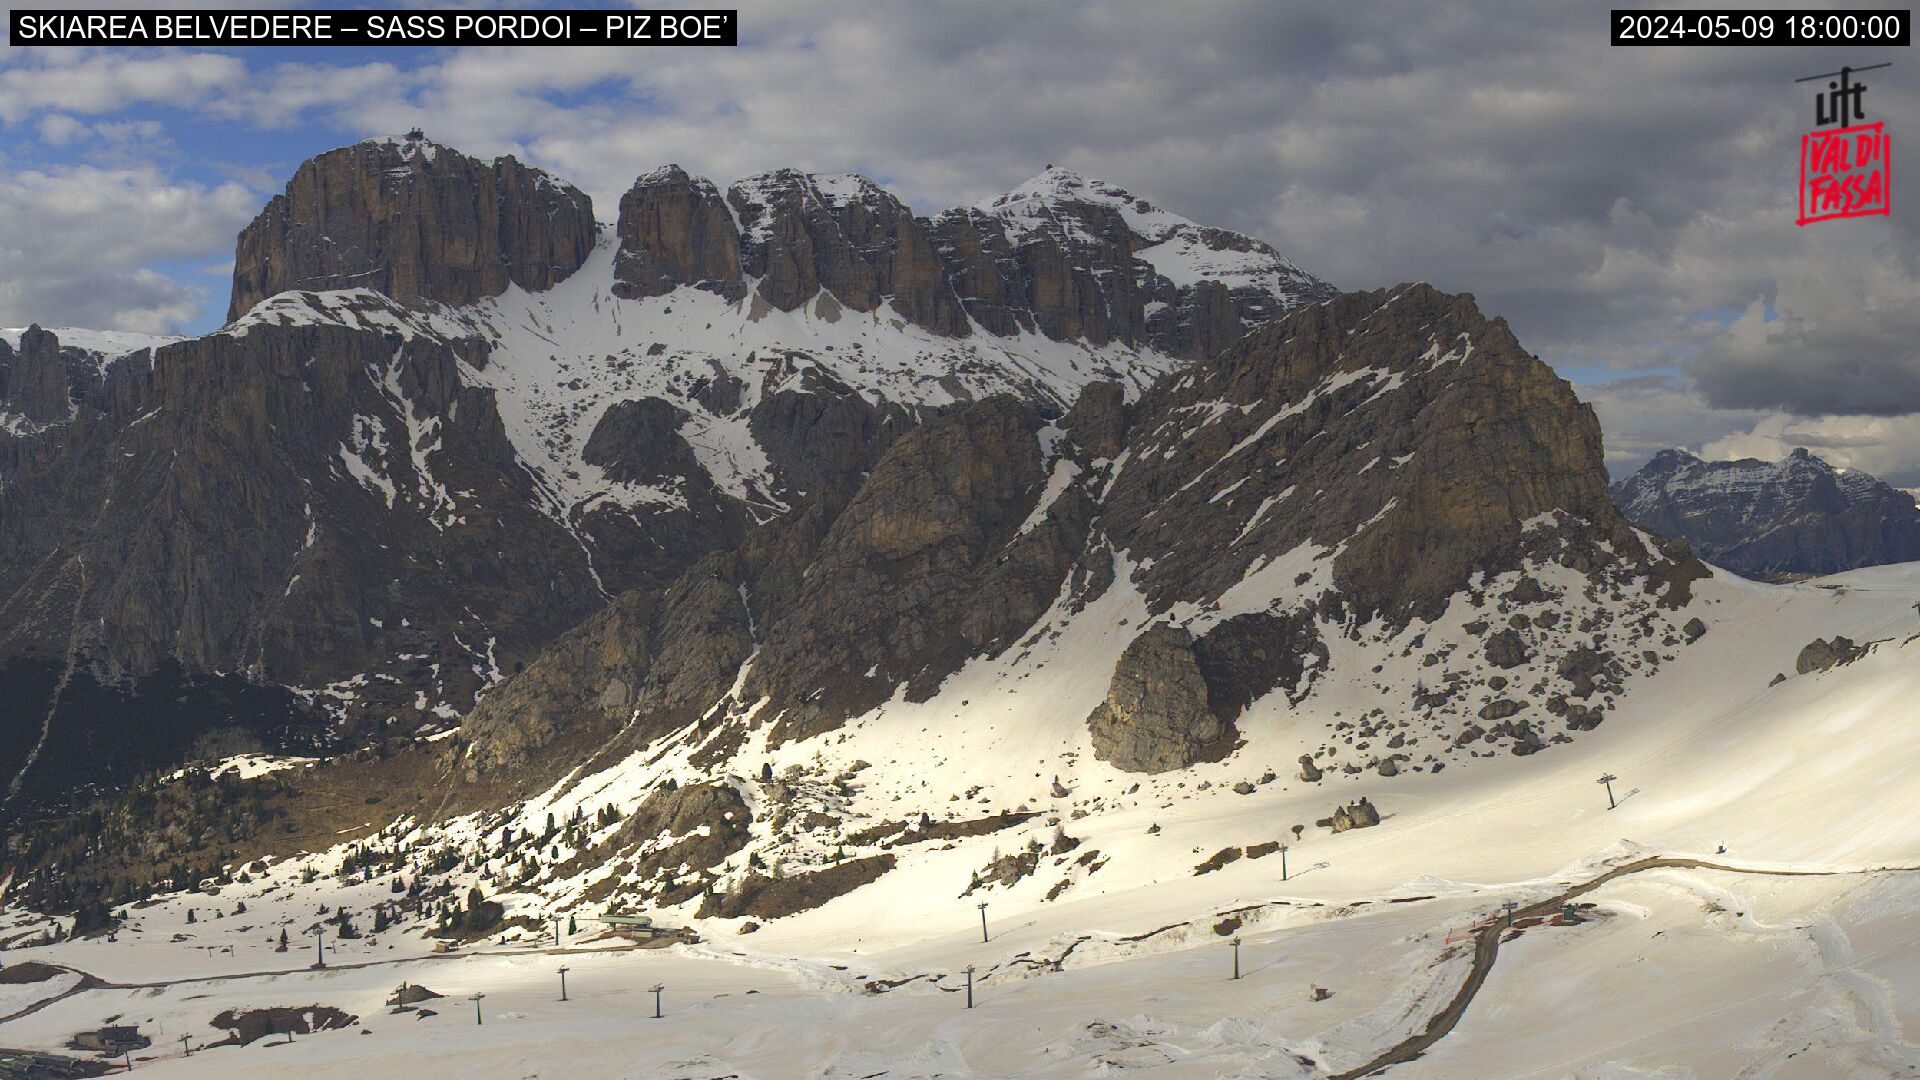 Webcam Canazei - Belvedere - Sas Becé - Altitude: 2,413 metresArea: Col dei RossiPanoramic viewpoint: static webcam. Panoramic view of the Belvedere ski area and the chair lifts 